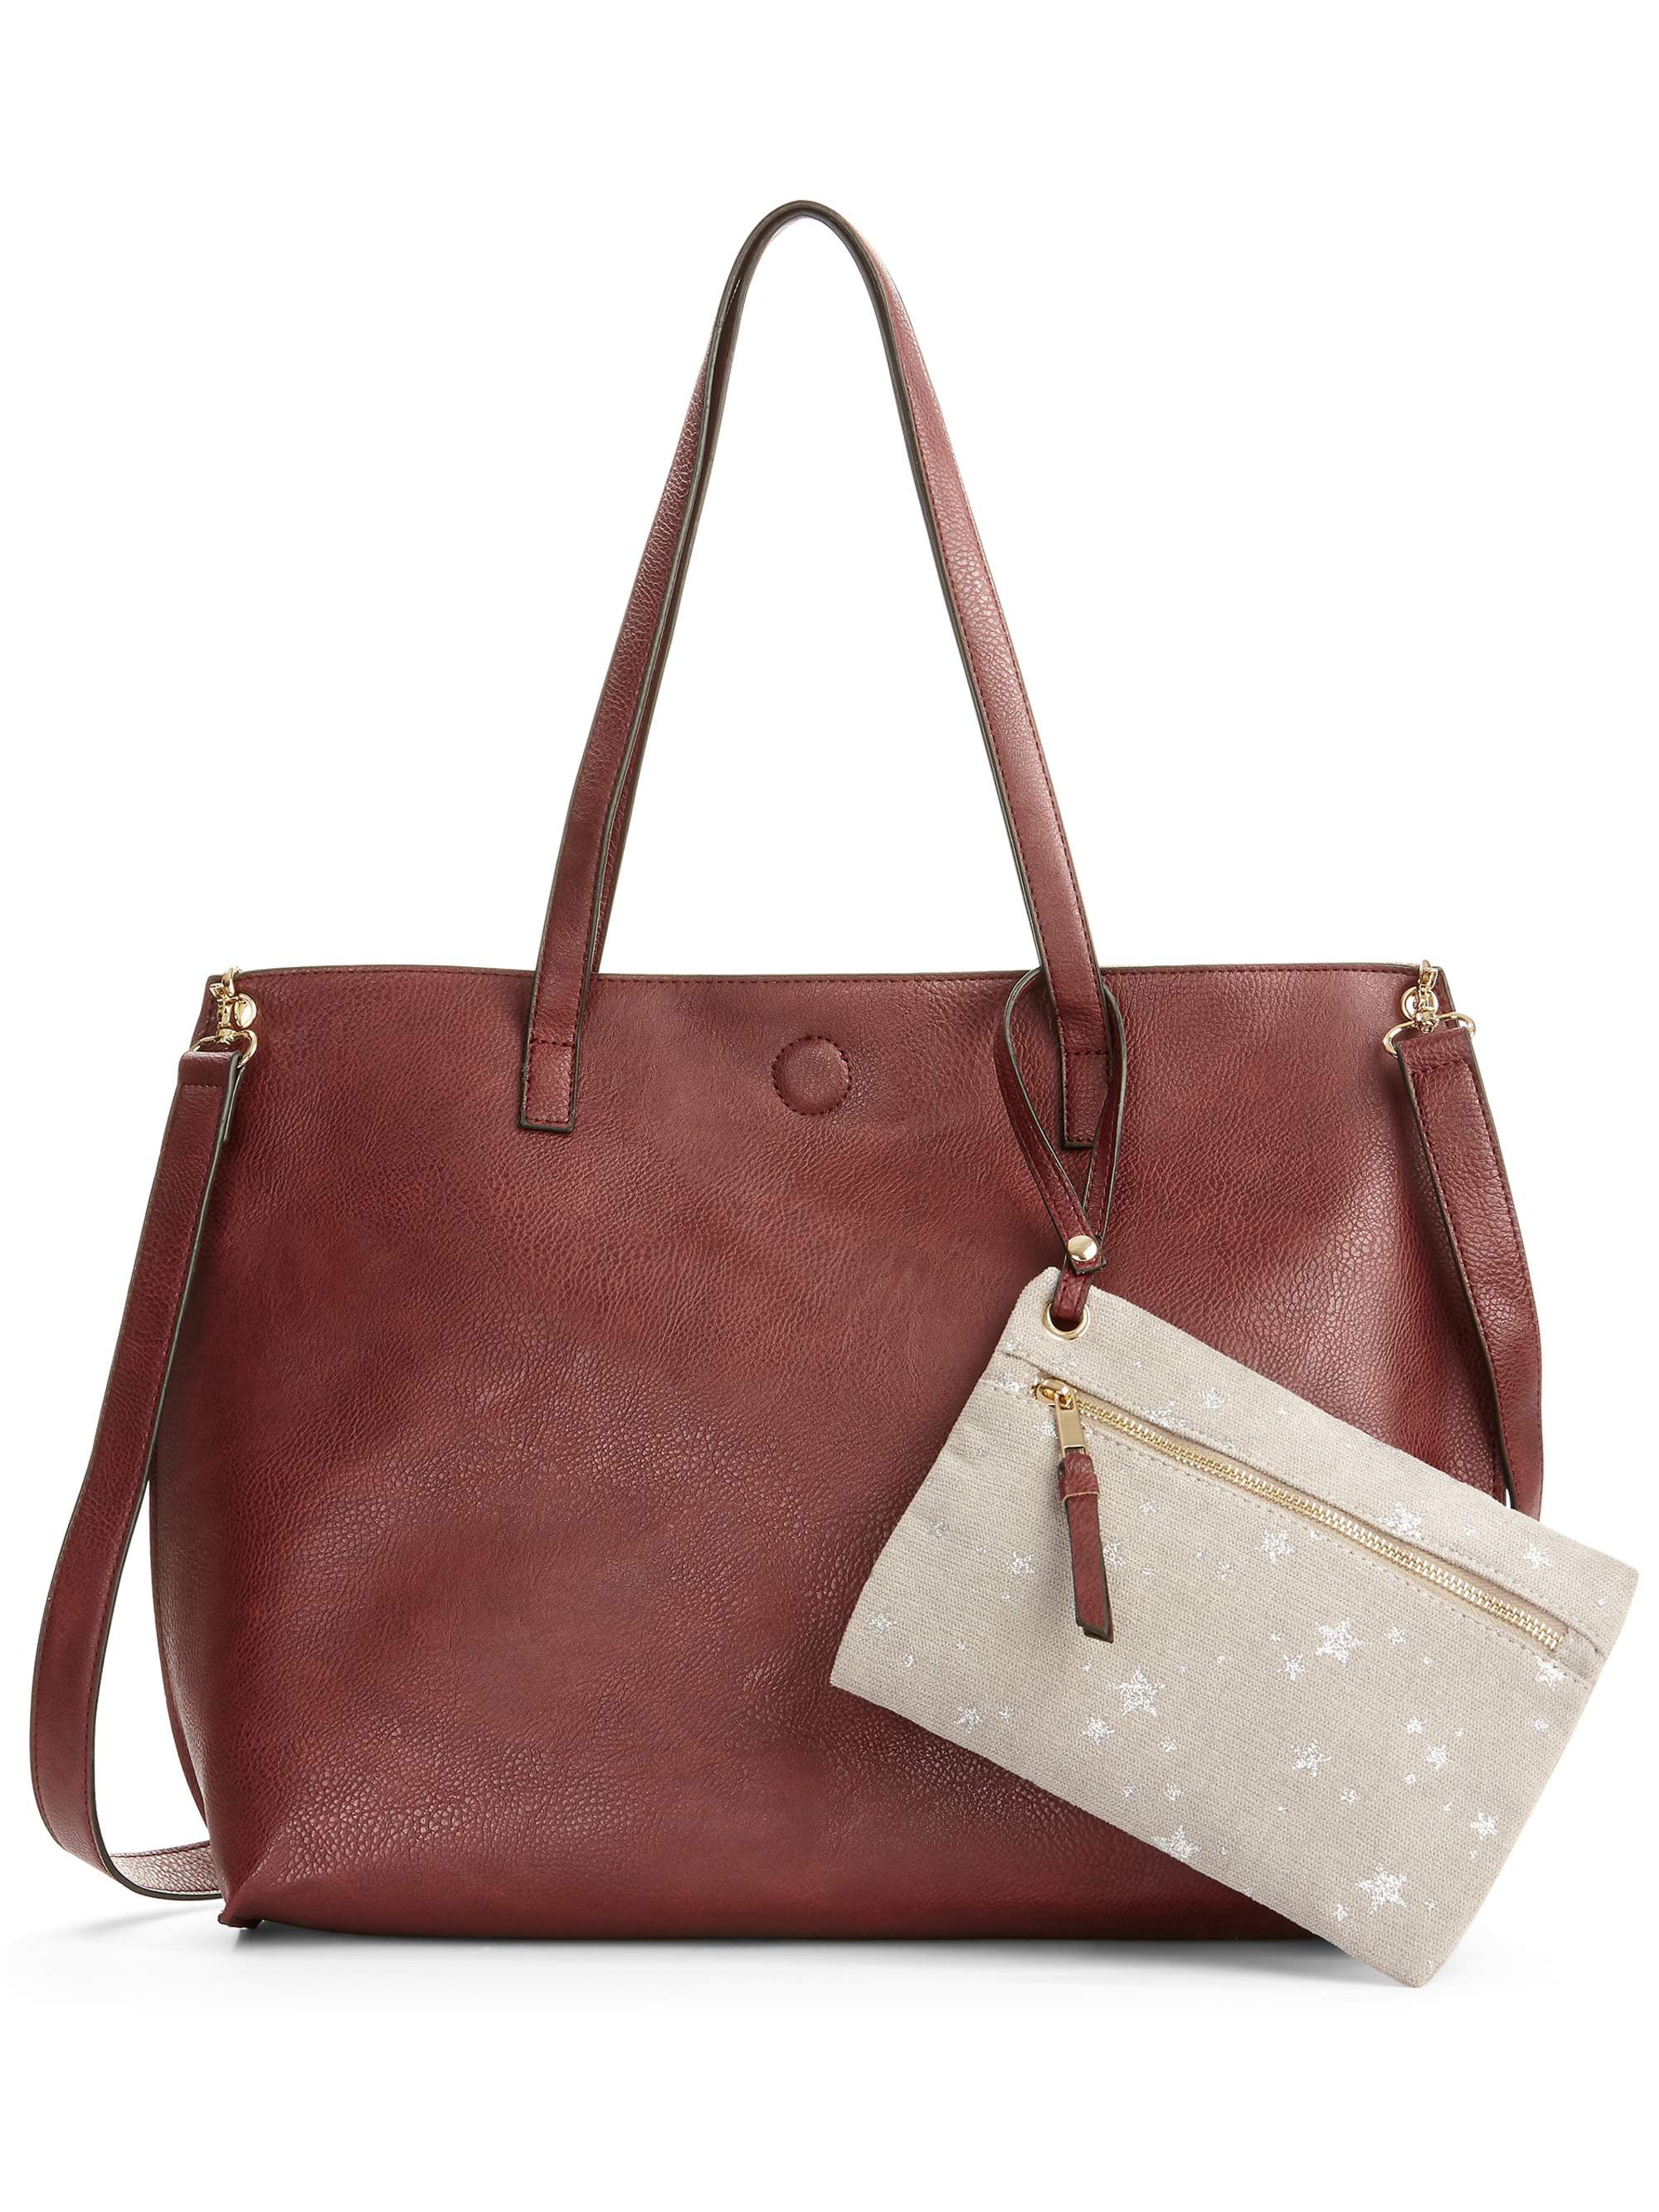 Milly Mimi Tote Bag